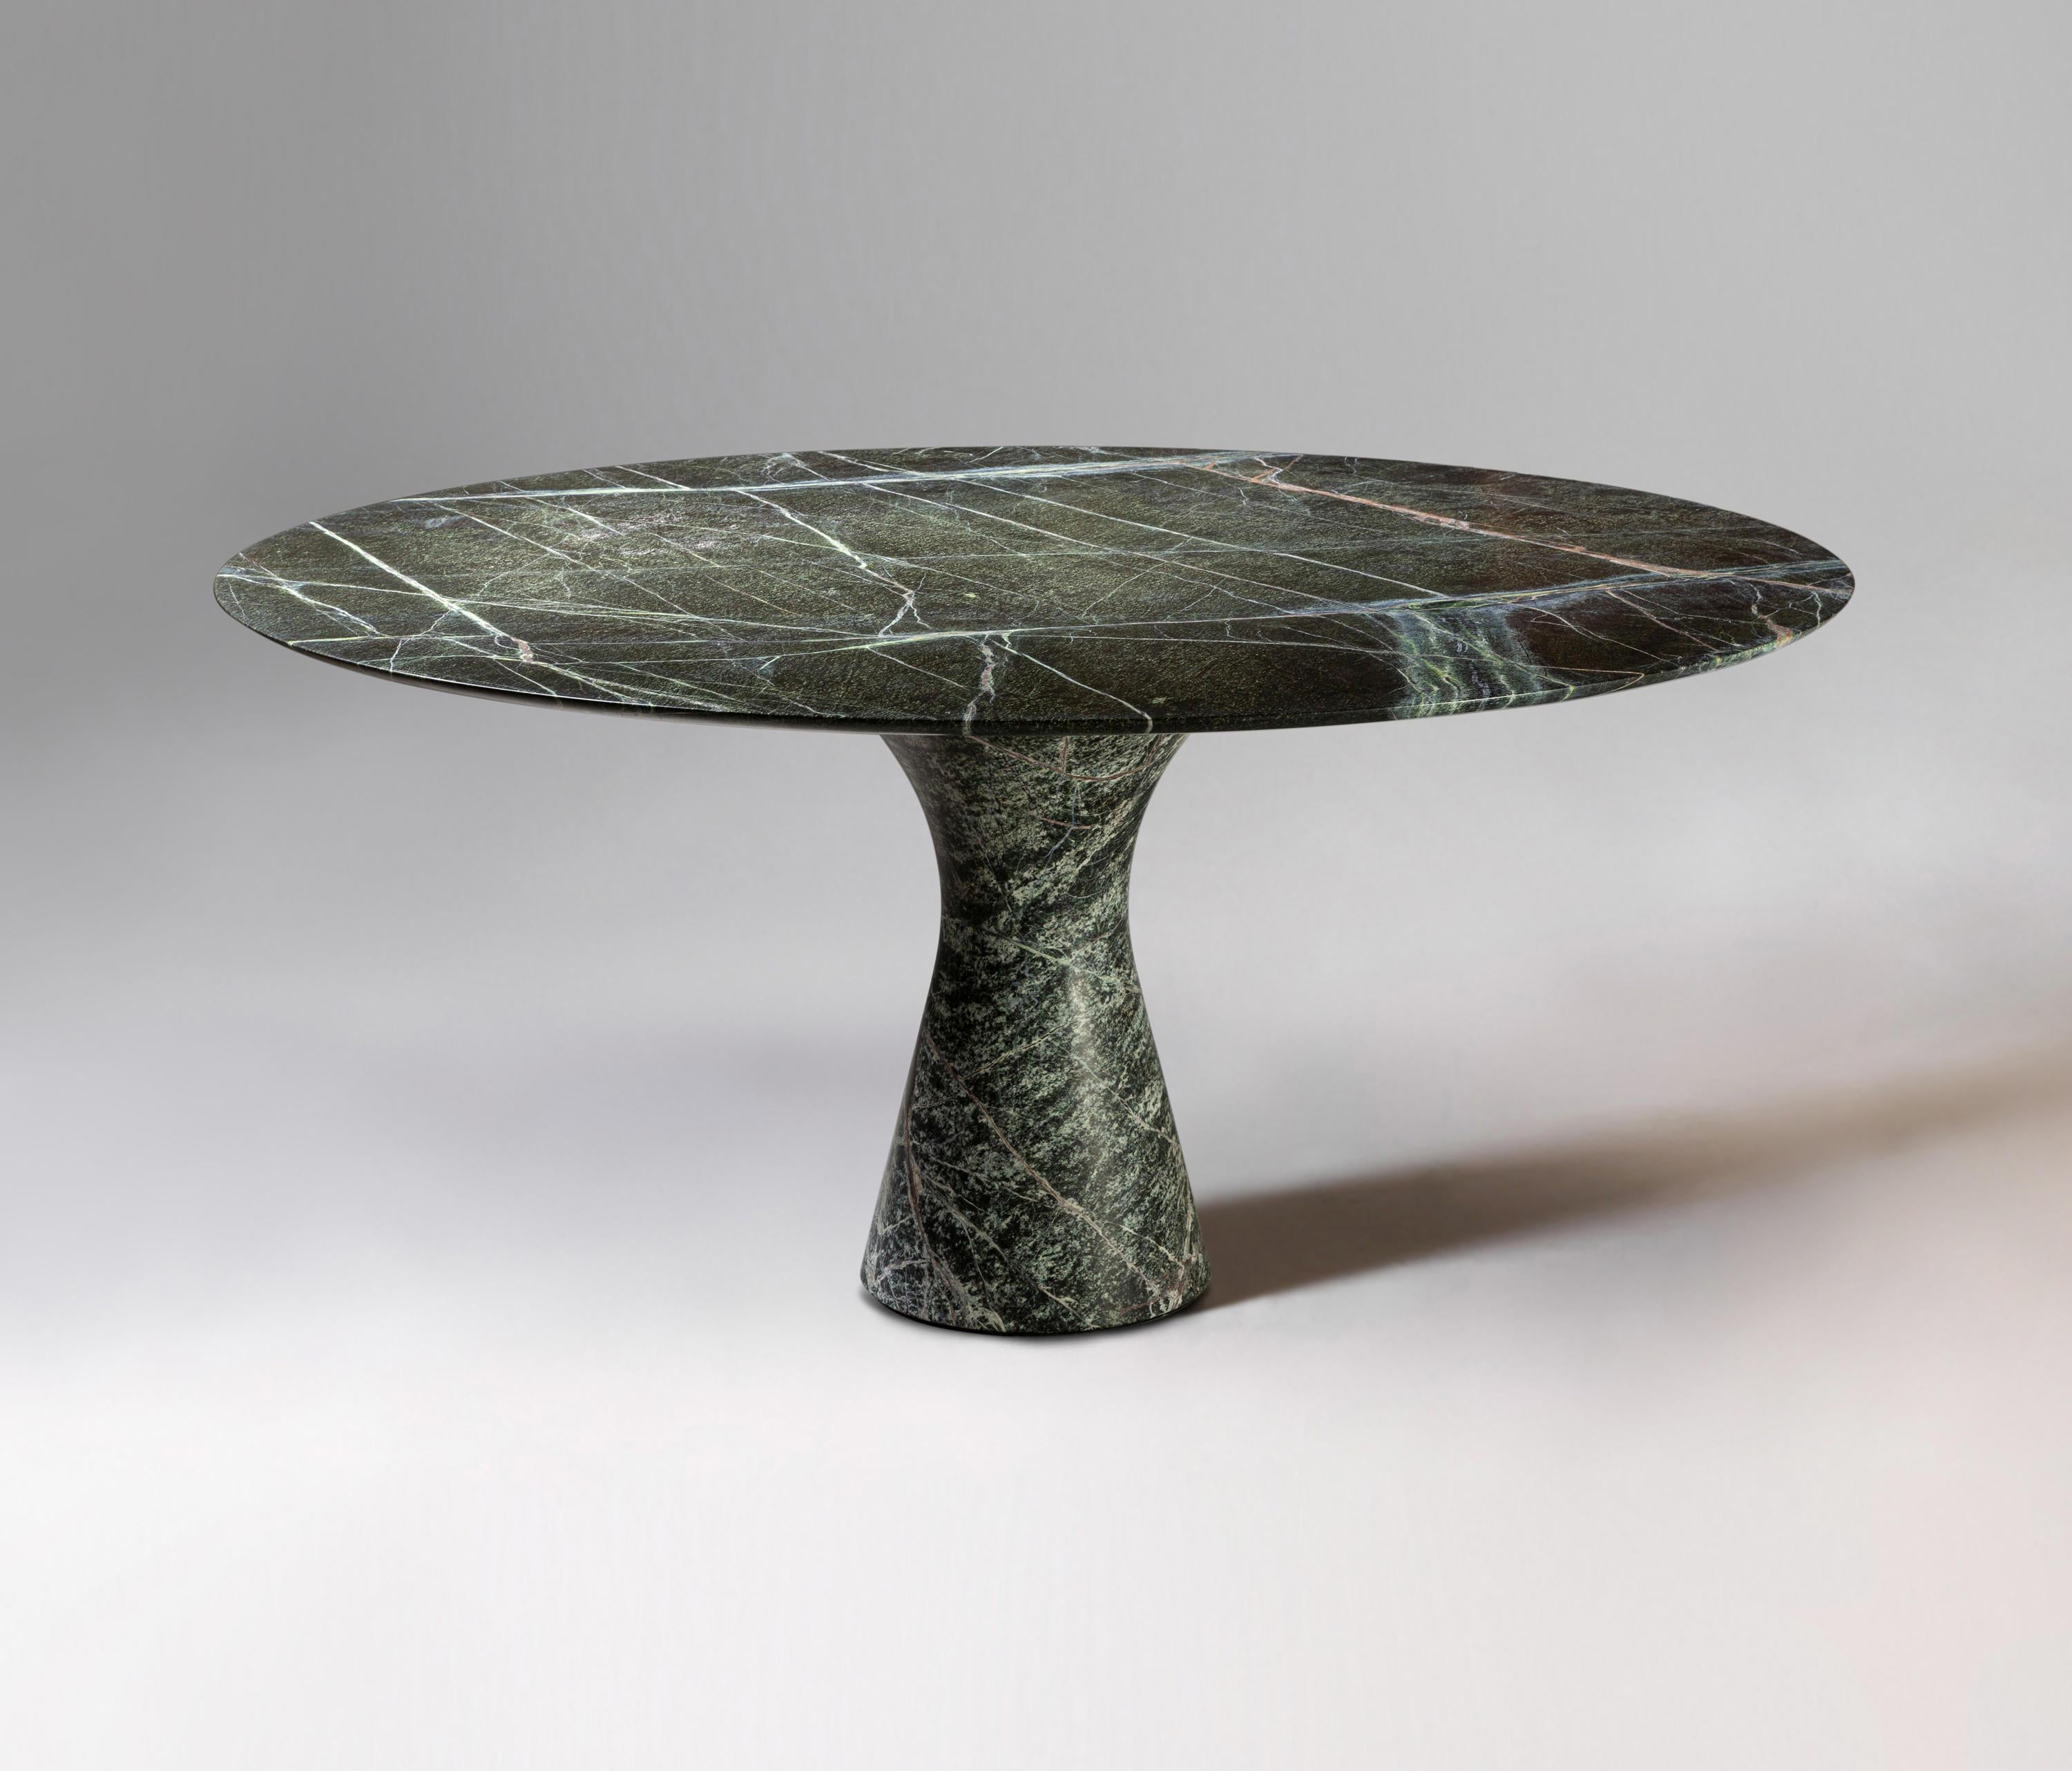 Picasso Green Refined Contemporary Marble Low Round Table, 36/100
Dimensions: 100 x H 36 cm.
Materials: Picasso green marble
Available in Kyknos, Grafite, Travertino Rosso, Grey Saint Laurent, Picasso green, Port Saint Laurent, Travertino Silver,